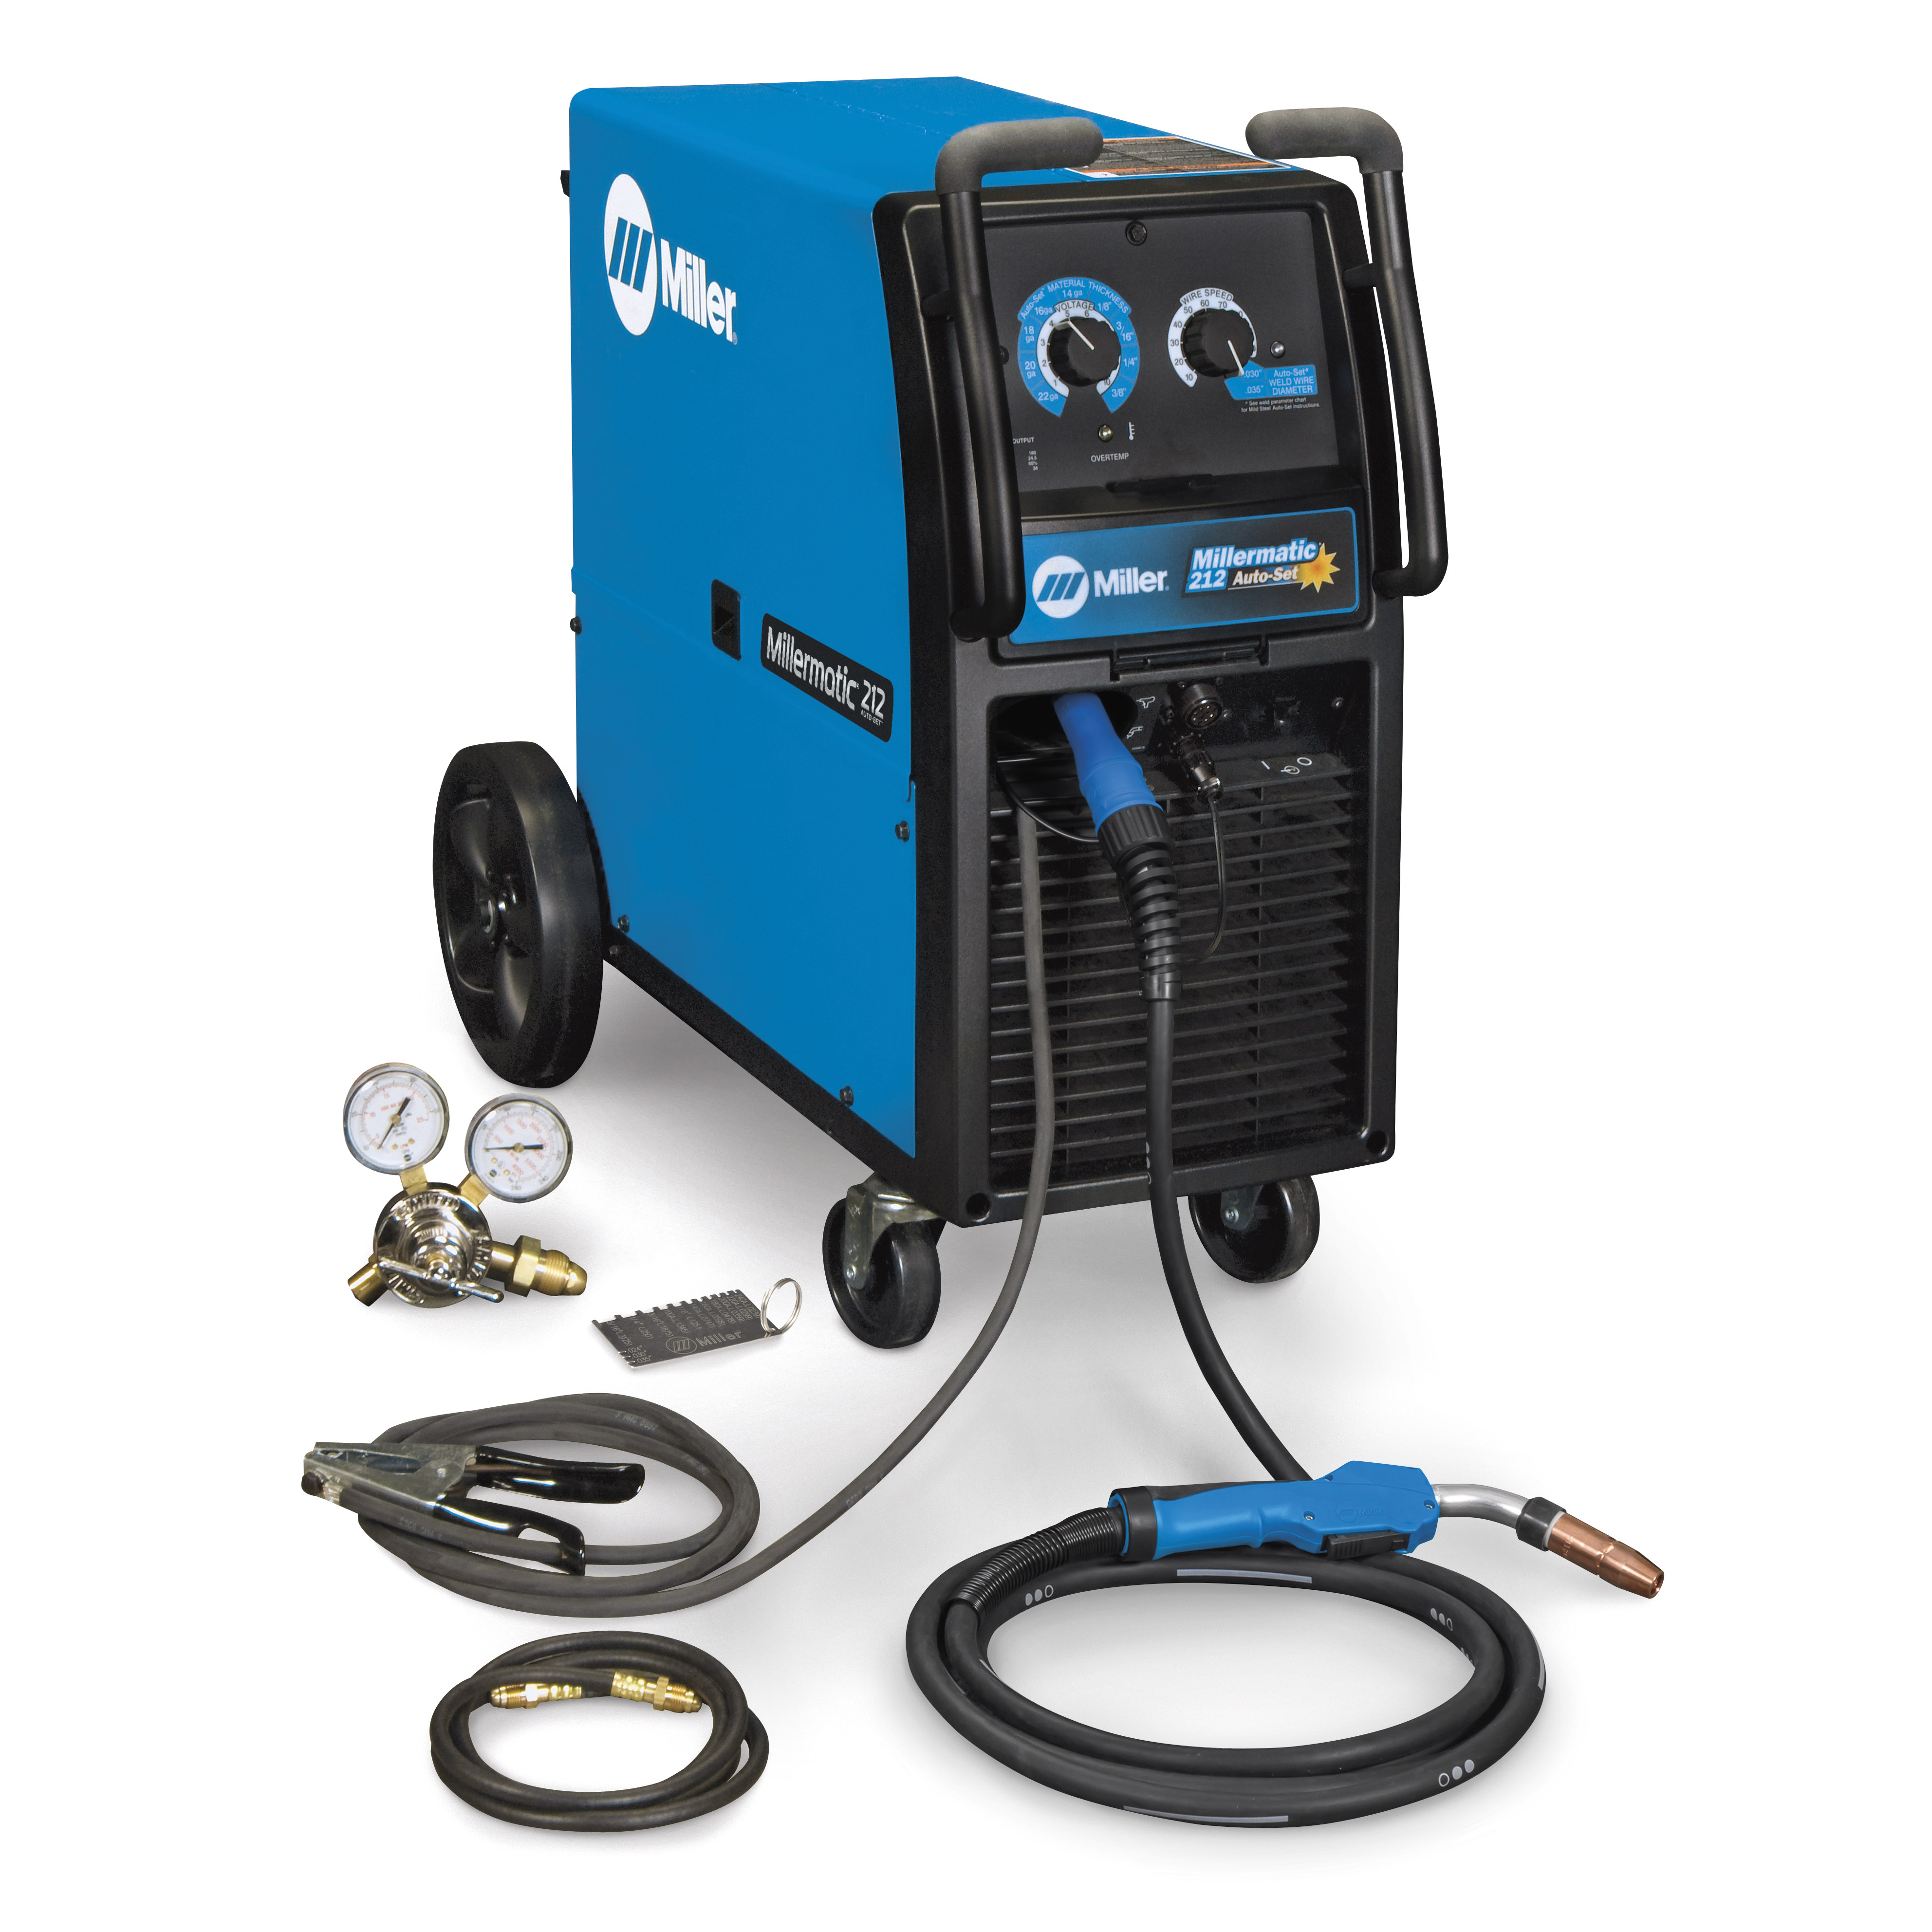 Millermatic 212 • Western Canada Welding Products